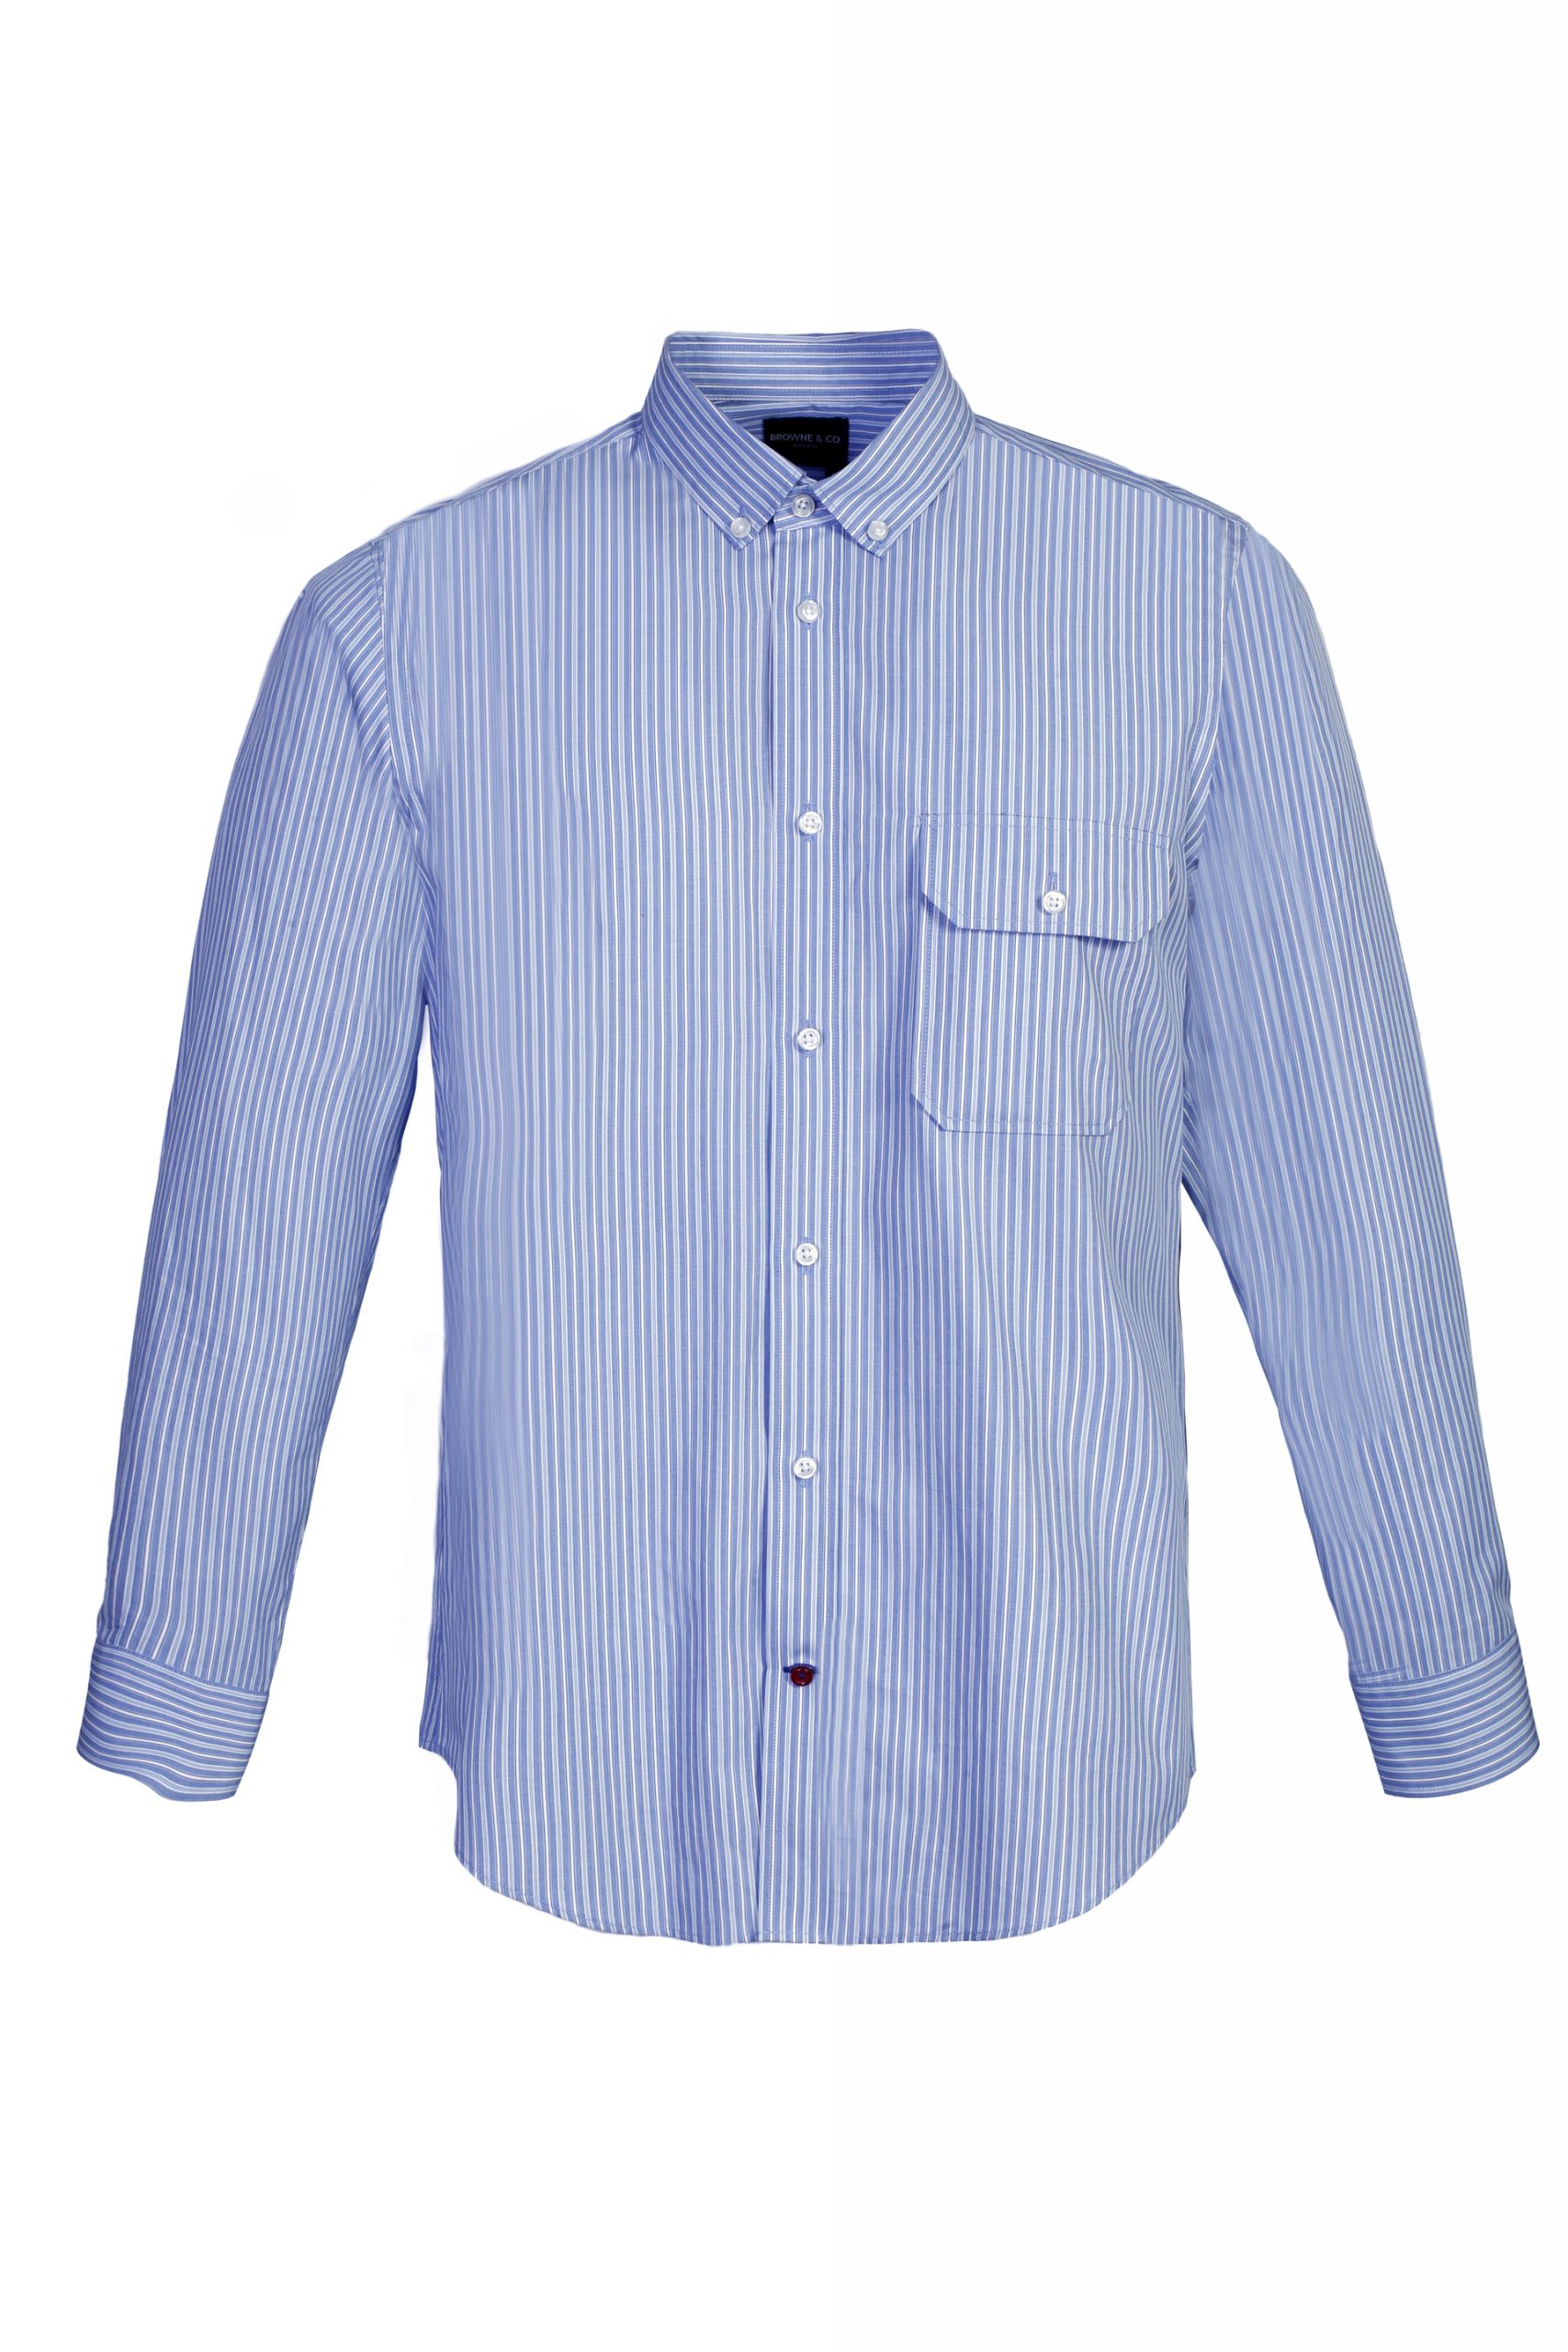 Blue Browne Collar Long Sleeves Stripes Shirt with Pocket – Browneandco.com